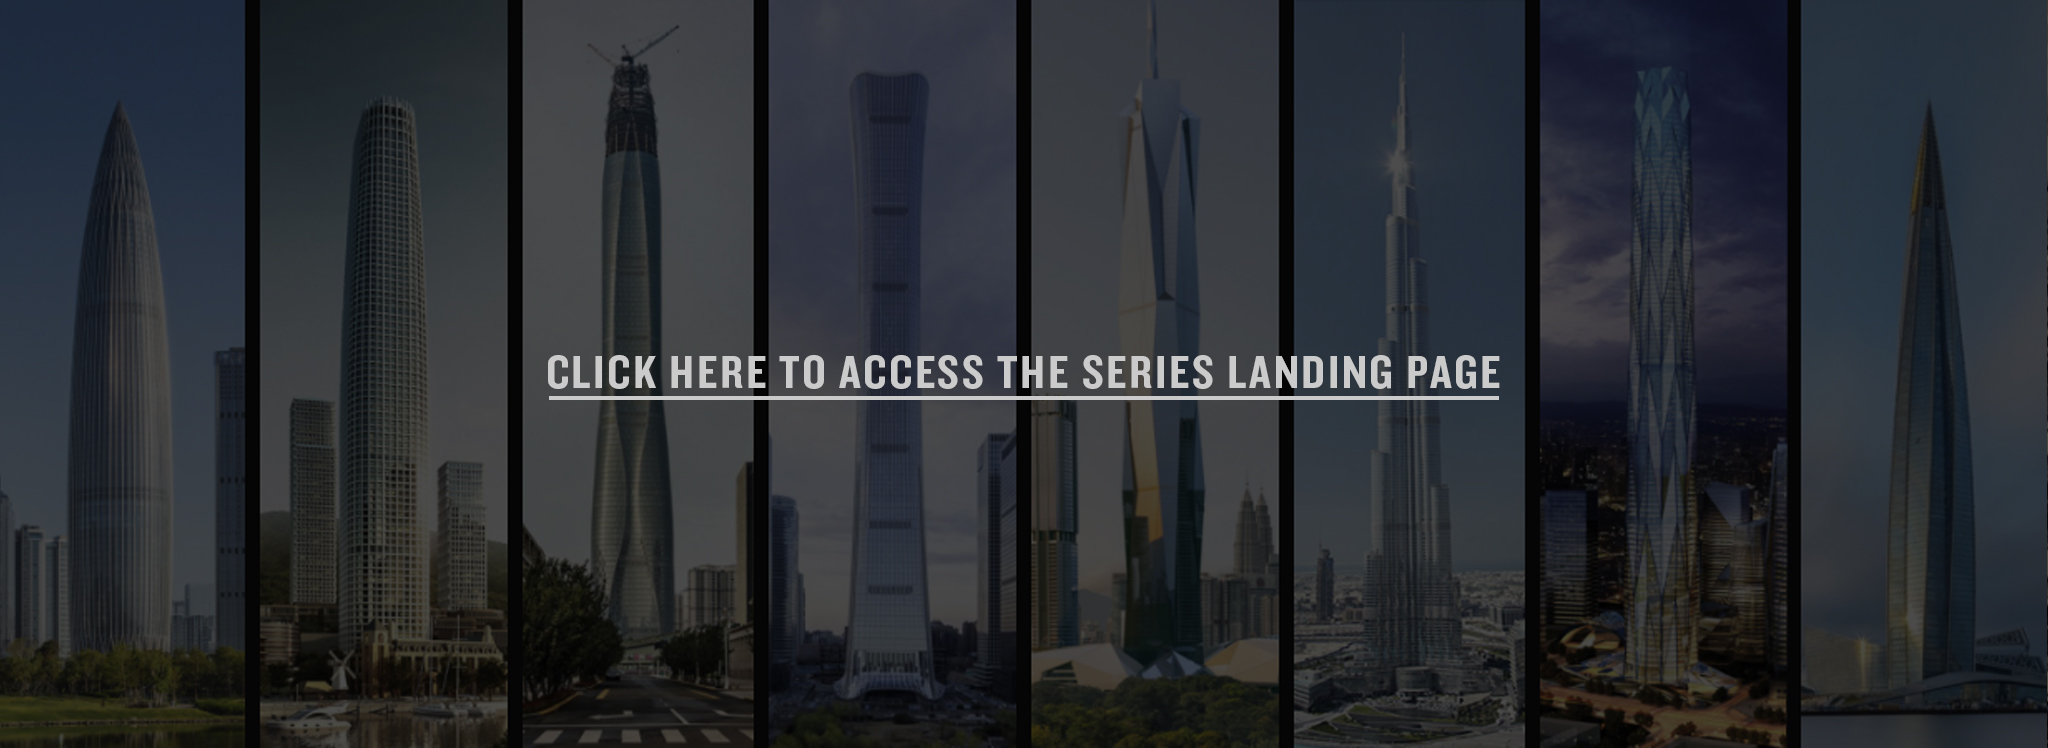 World-view-towers_banner